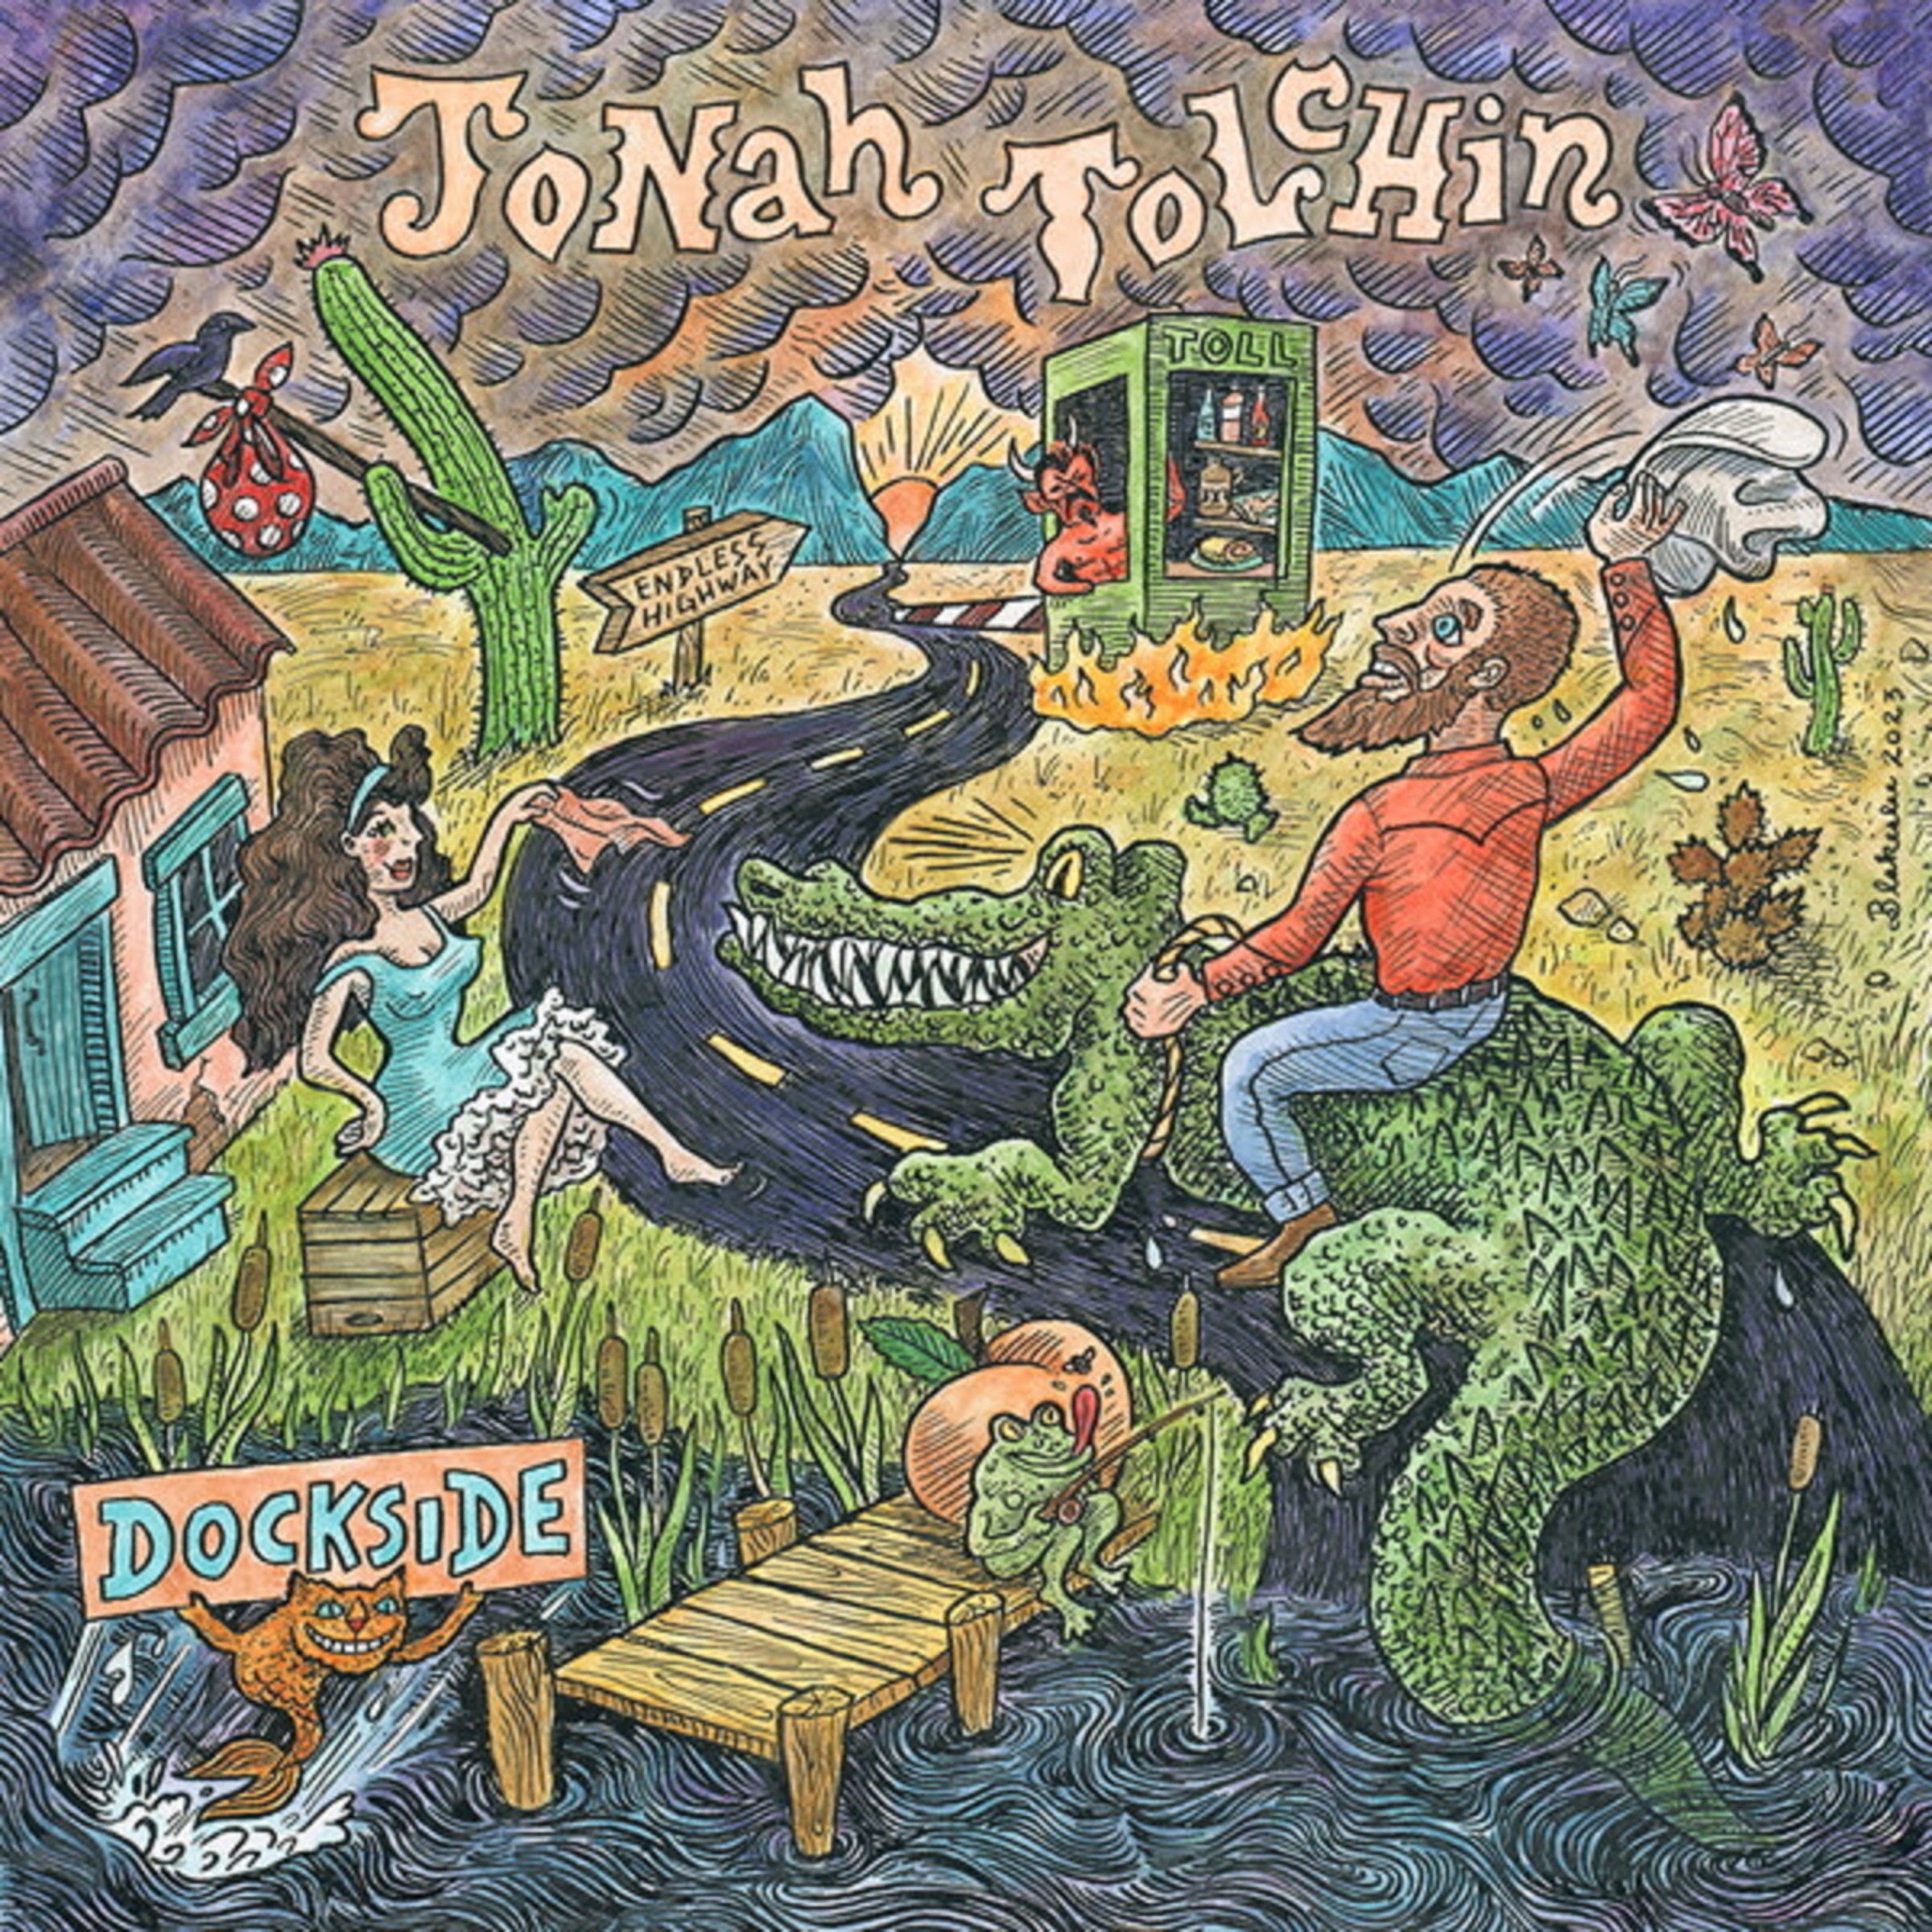 JONAH TOLCHIN RELEASES SINGLE “SAVE ME (FROM MYSELF)” FROM ALBUM DOCKSIDE